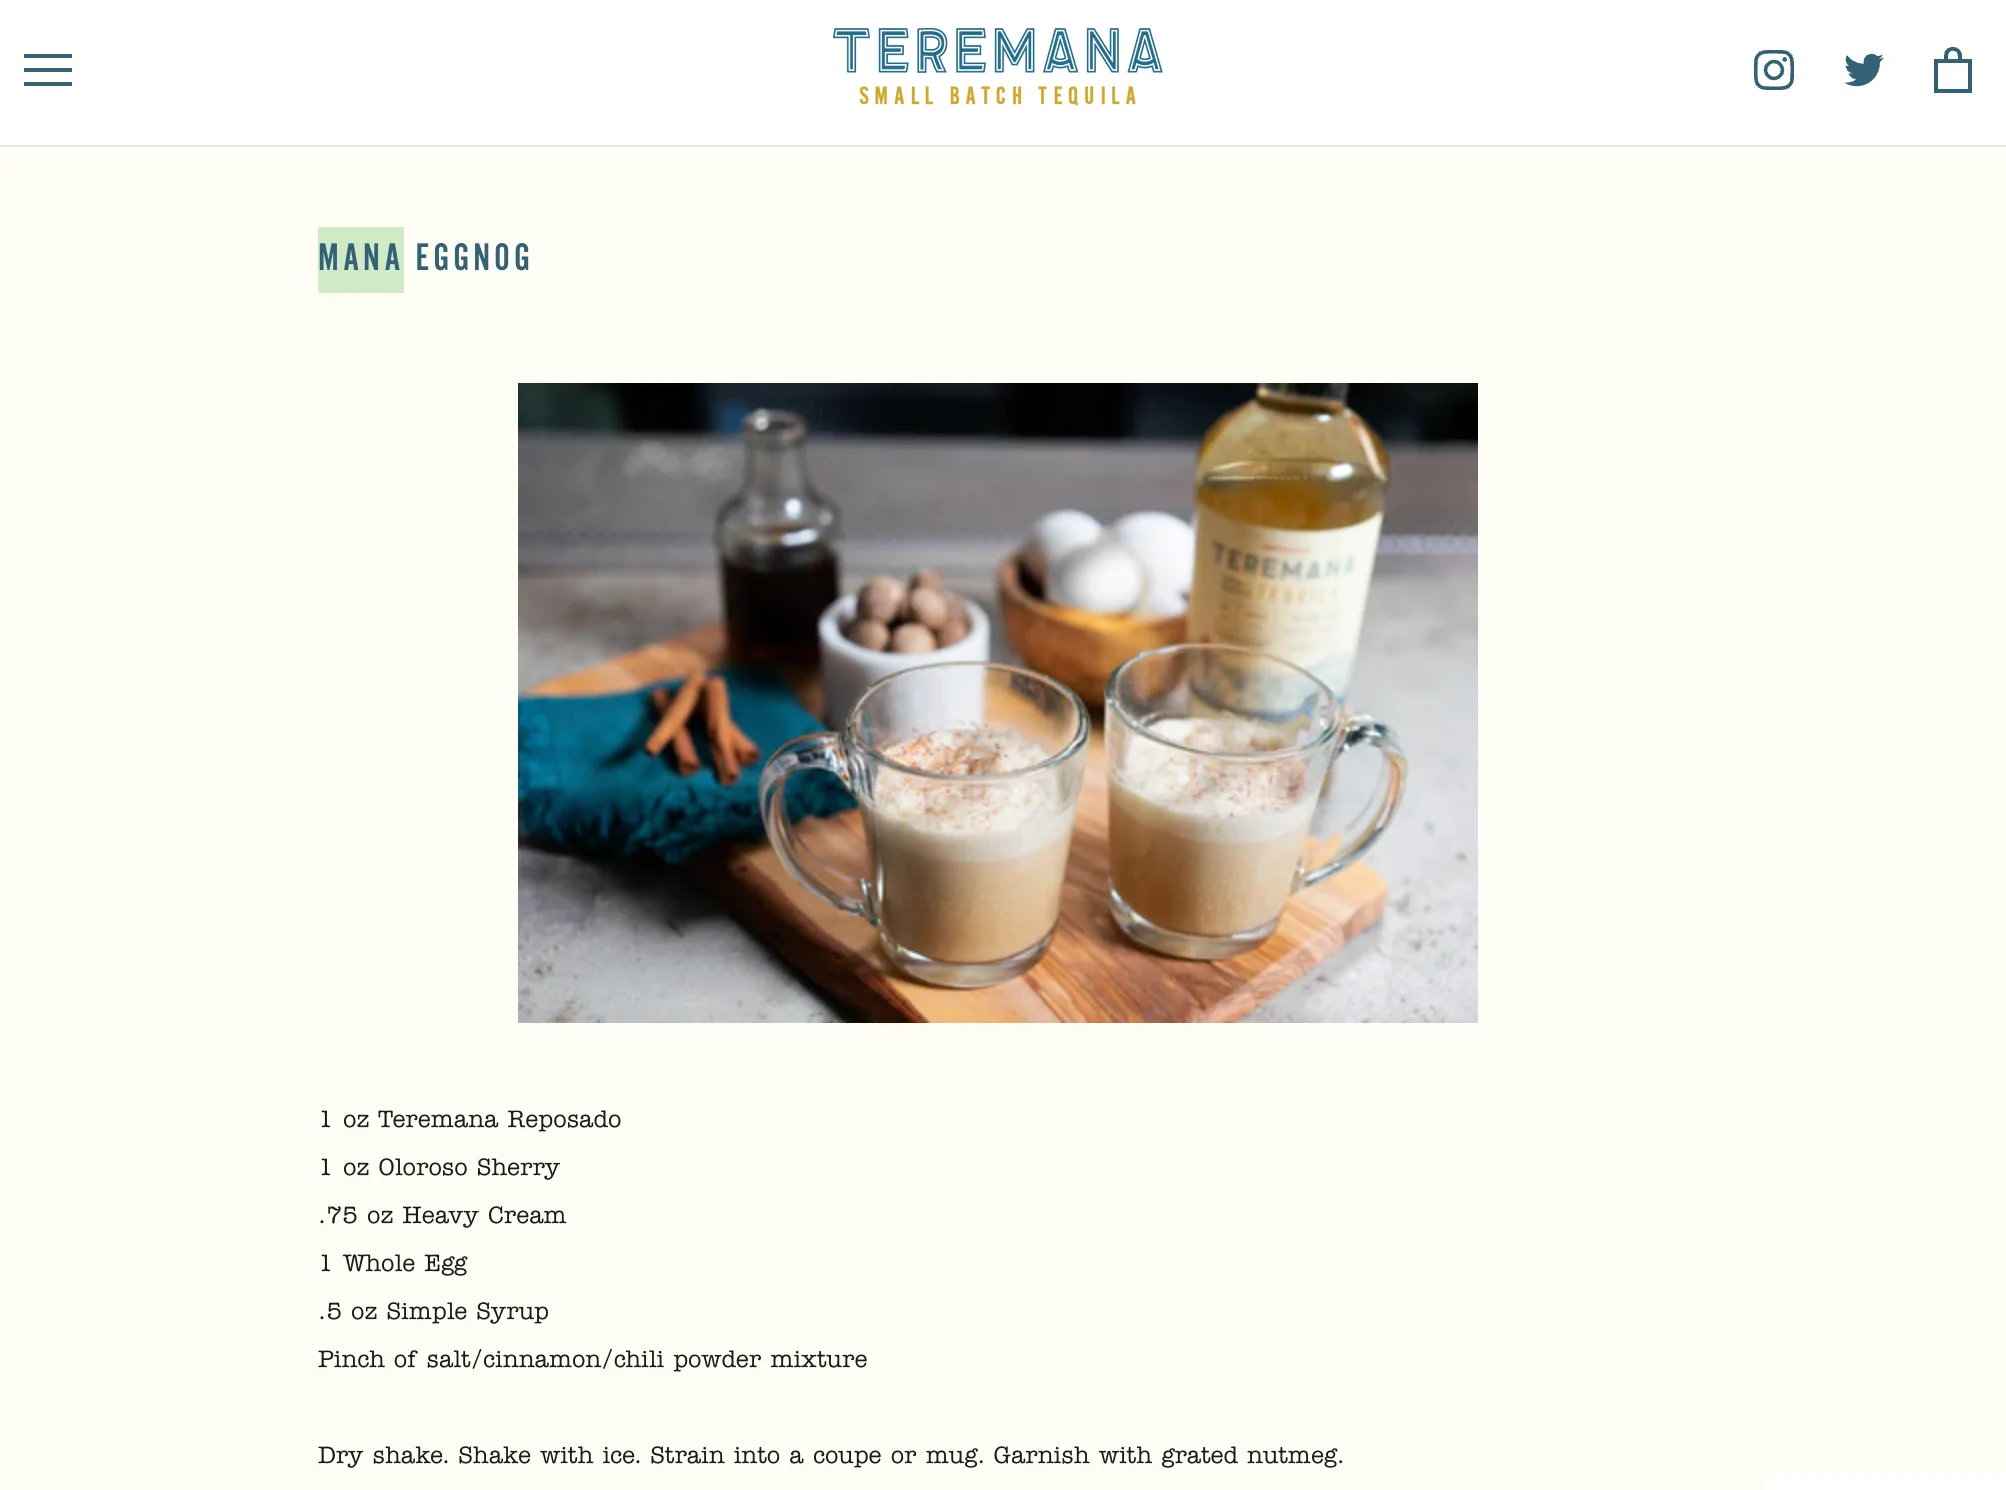 Webpage featuring a cocktail recipe